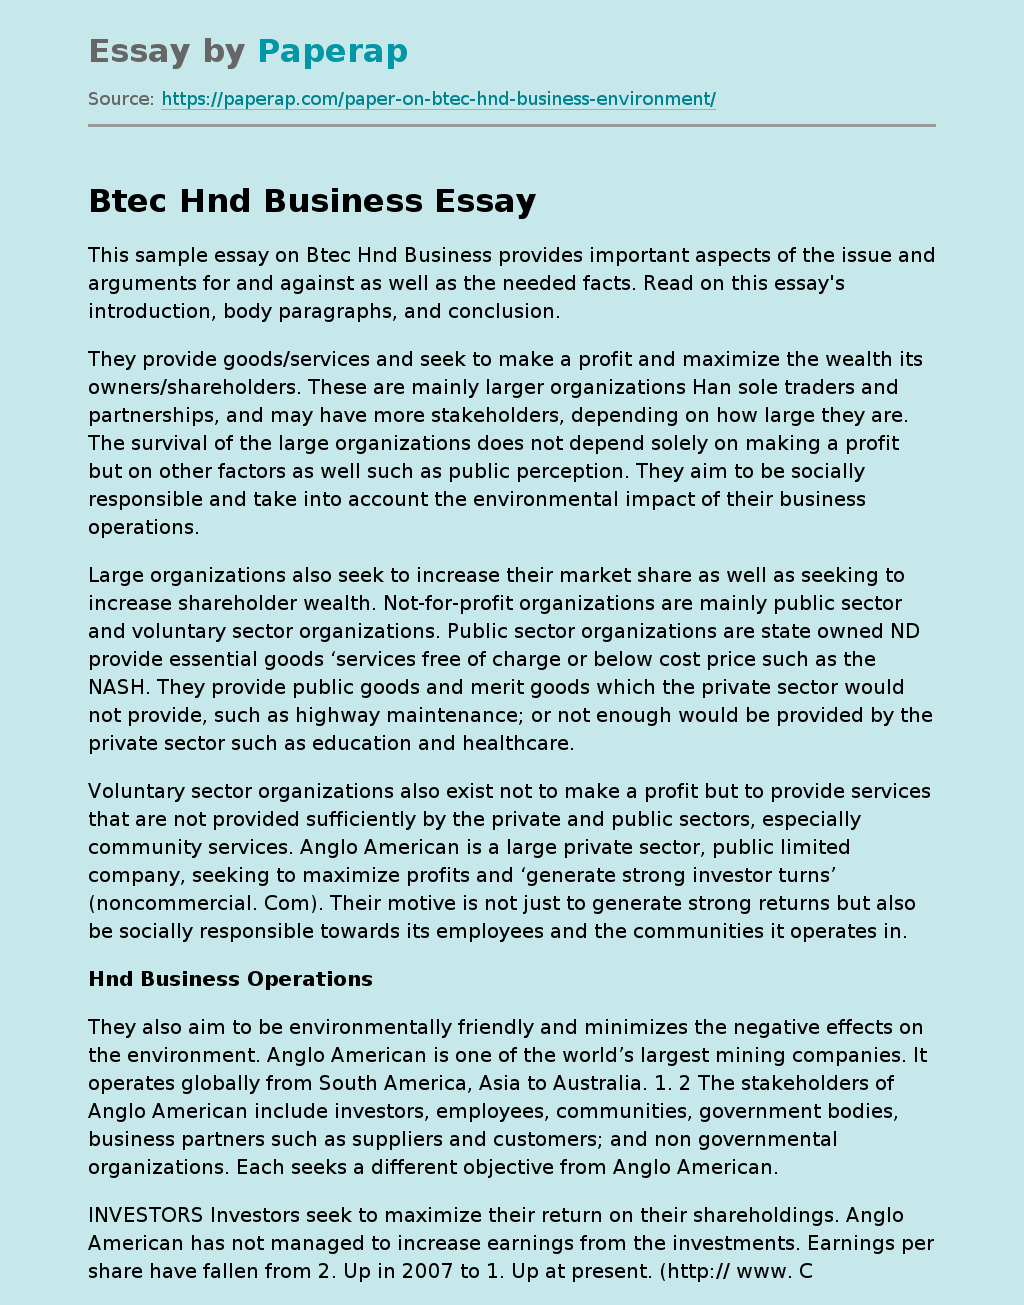 Btec Hnd Business